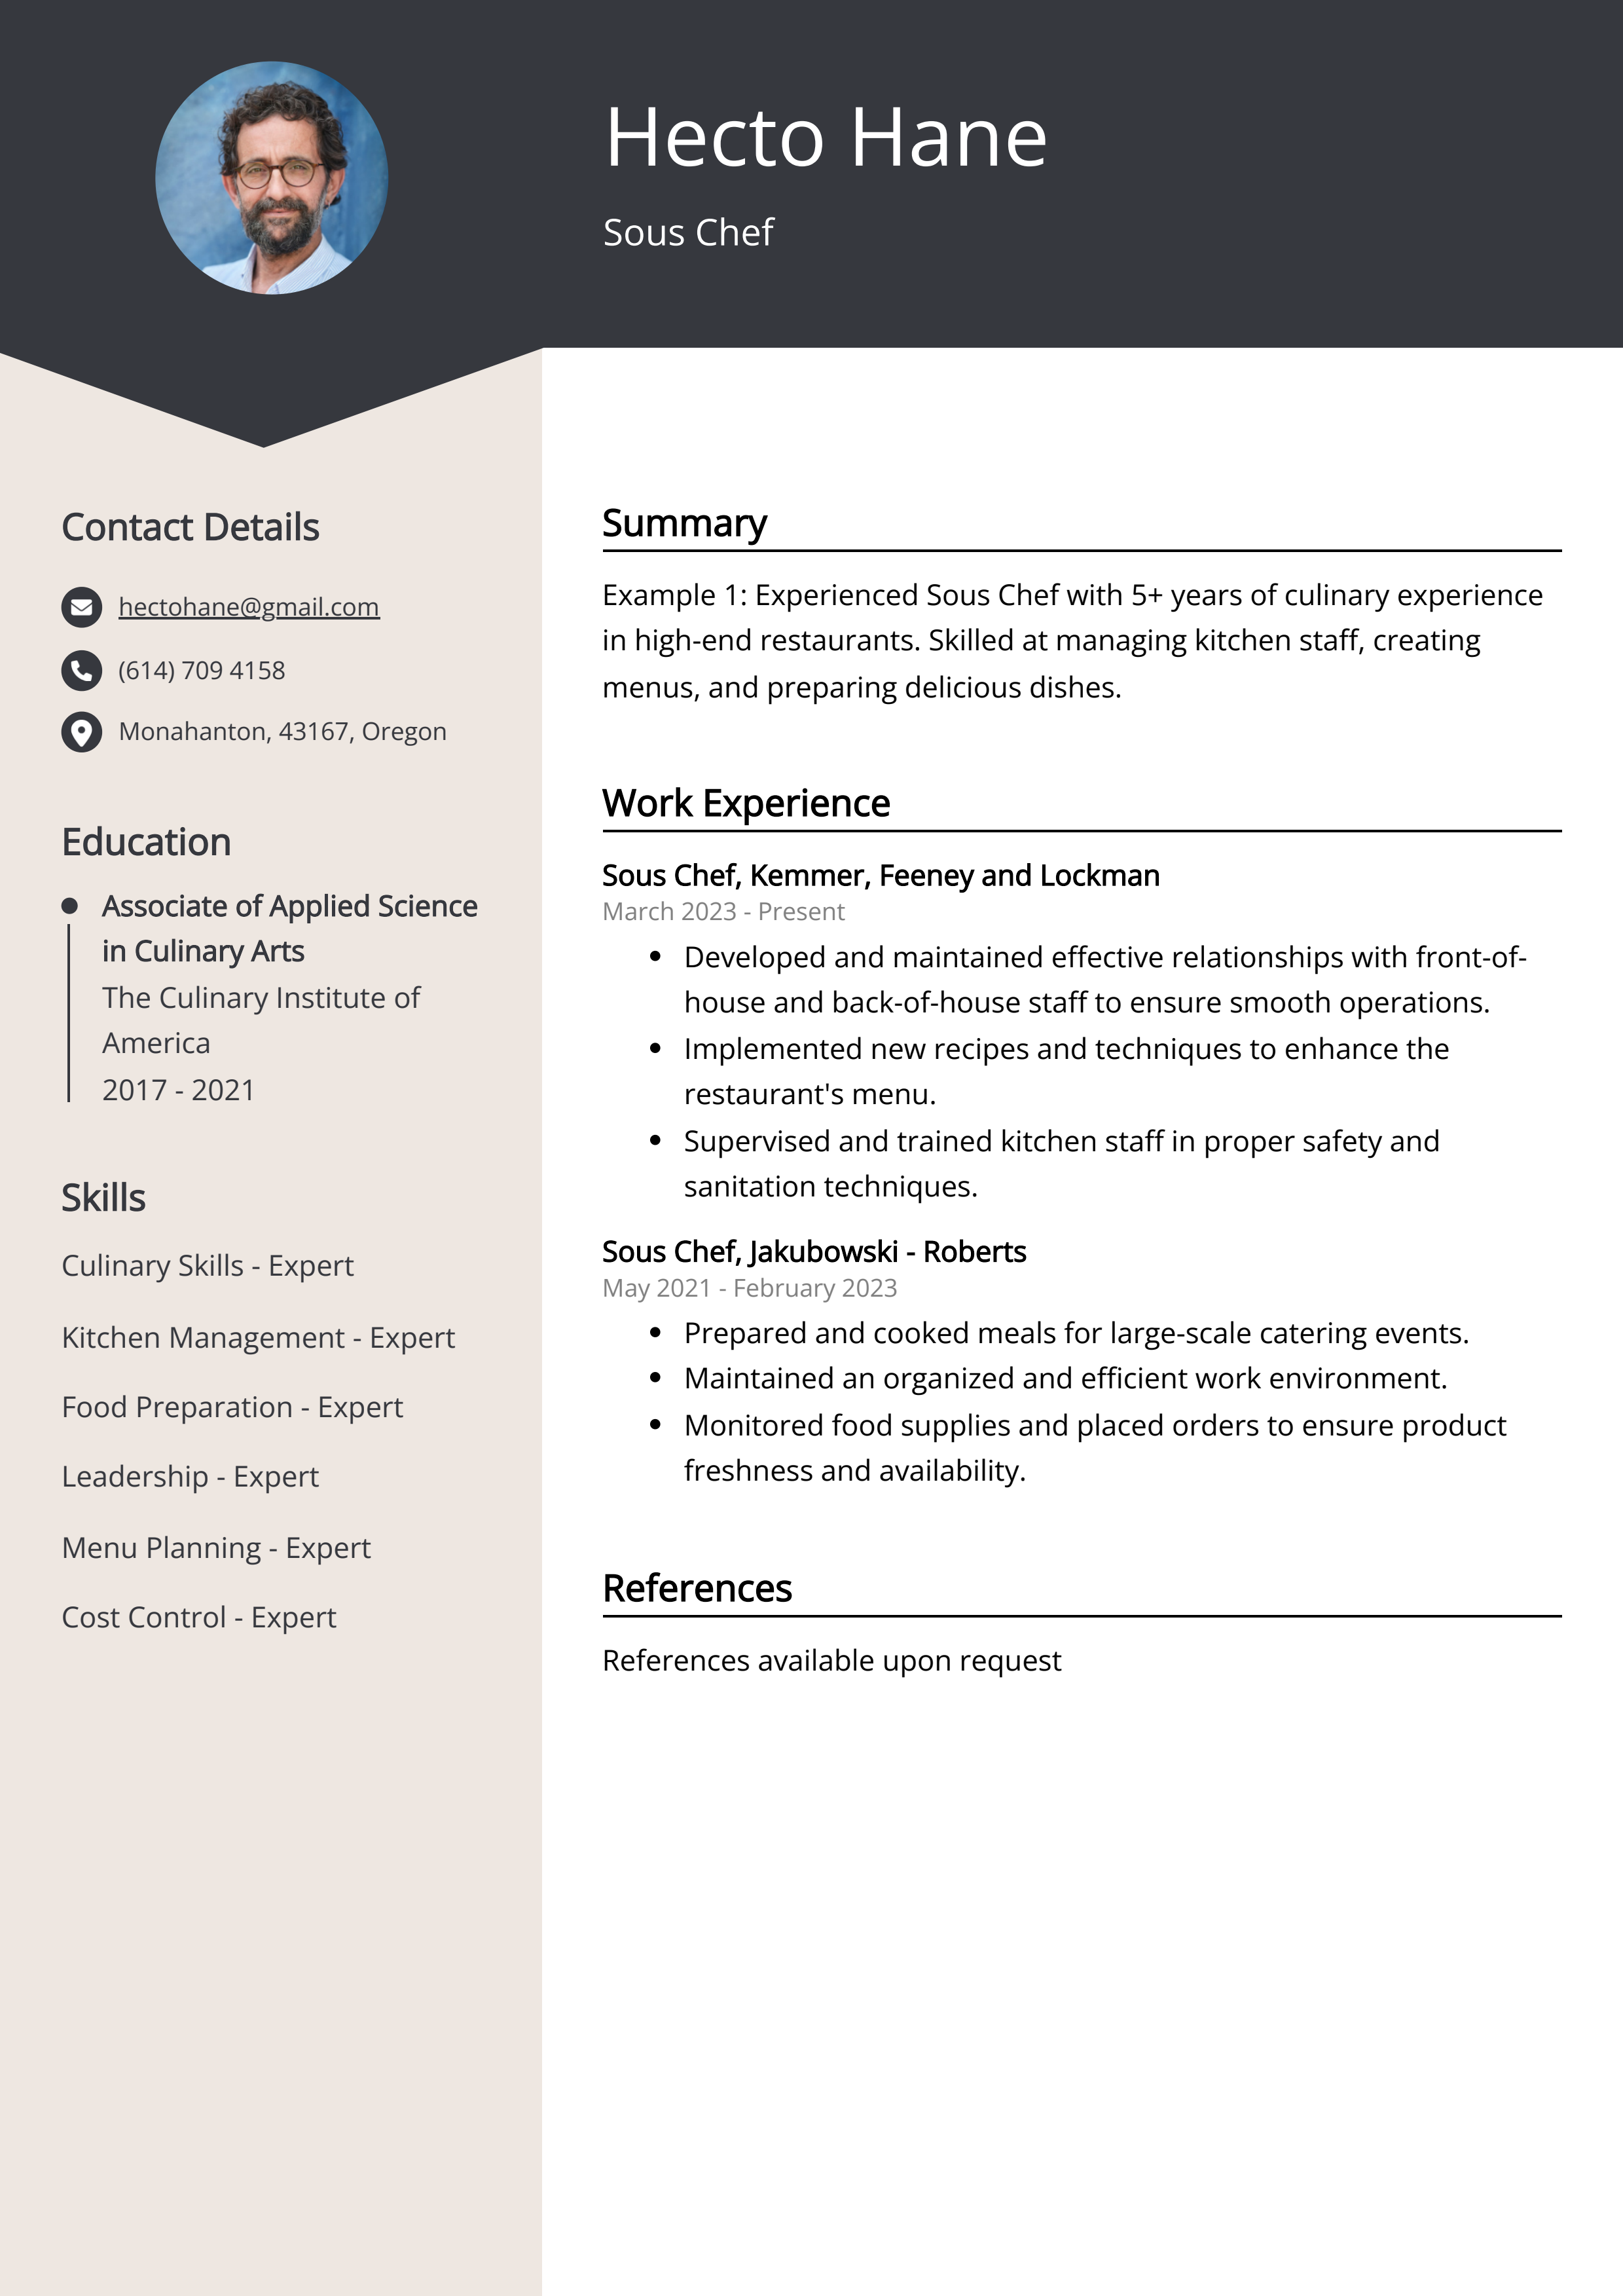 Sous Chef CV Example